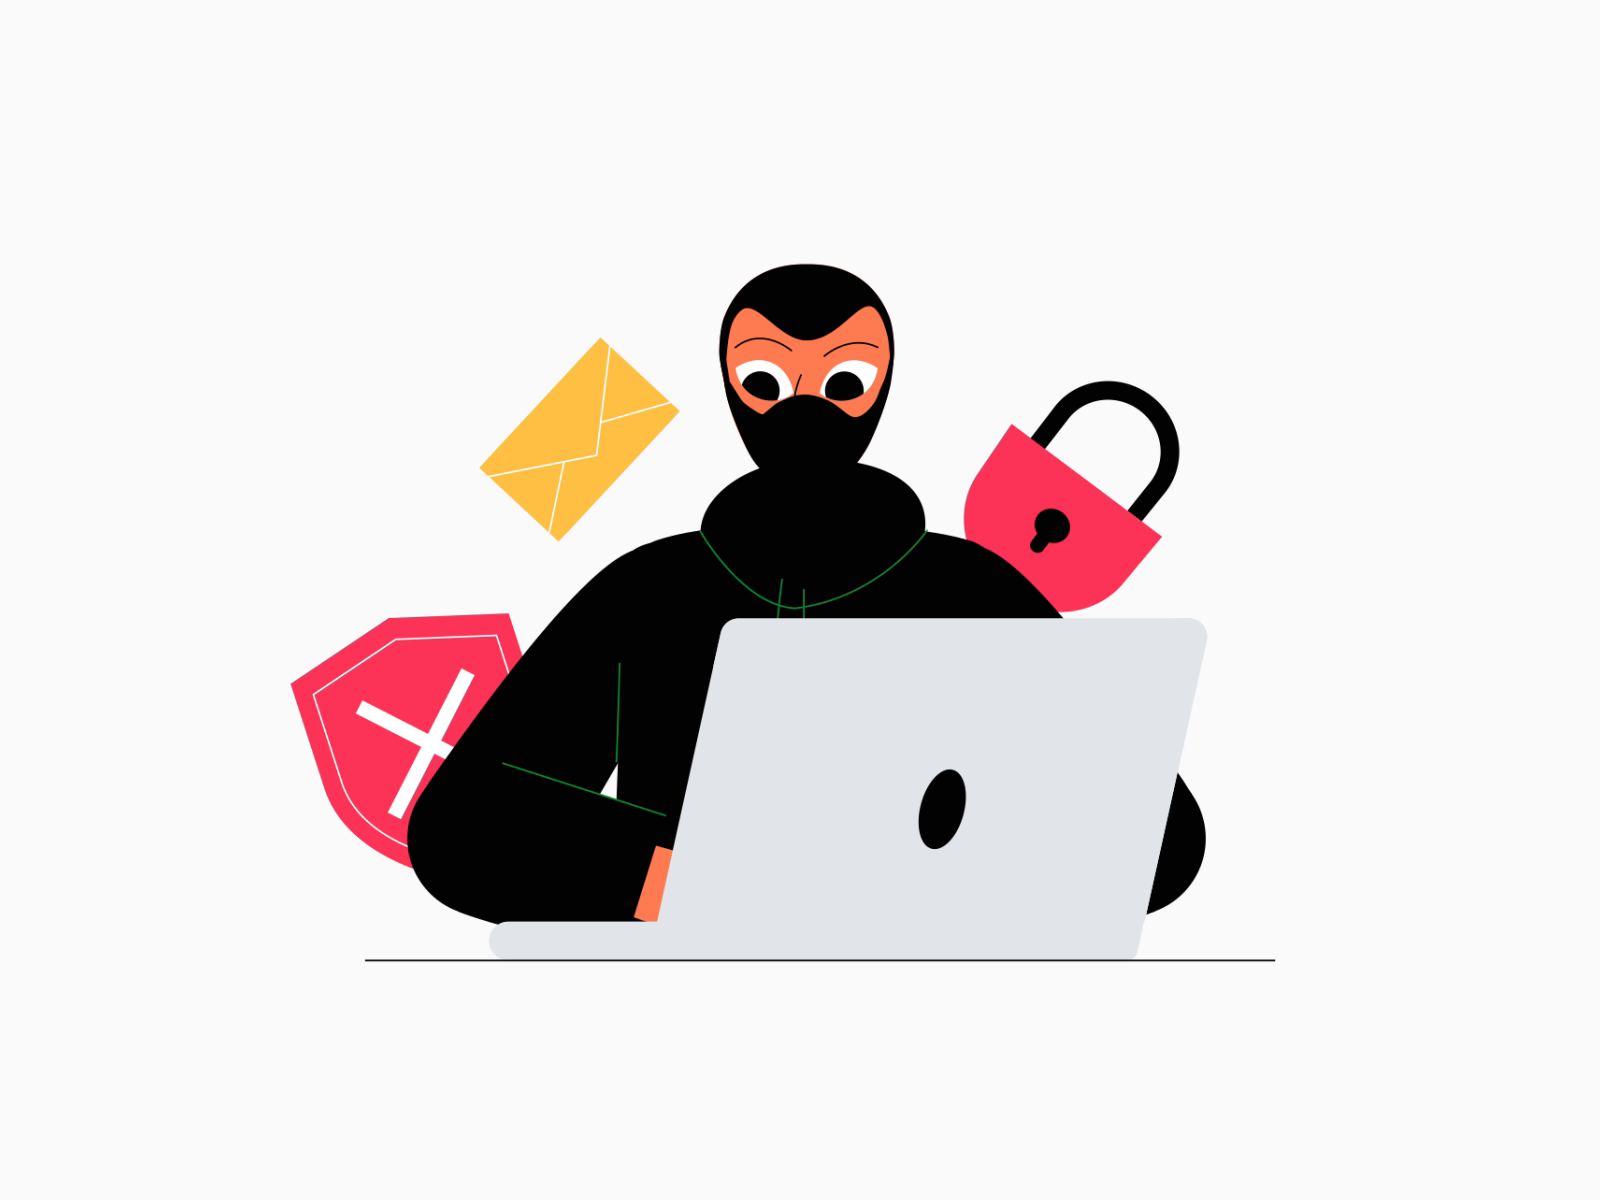 Cyber Security animations by Creattie on Dribbble